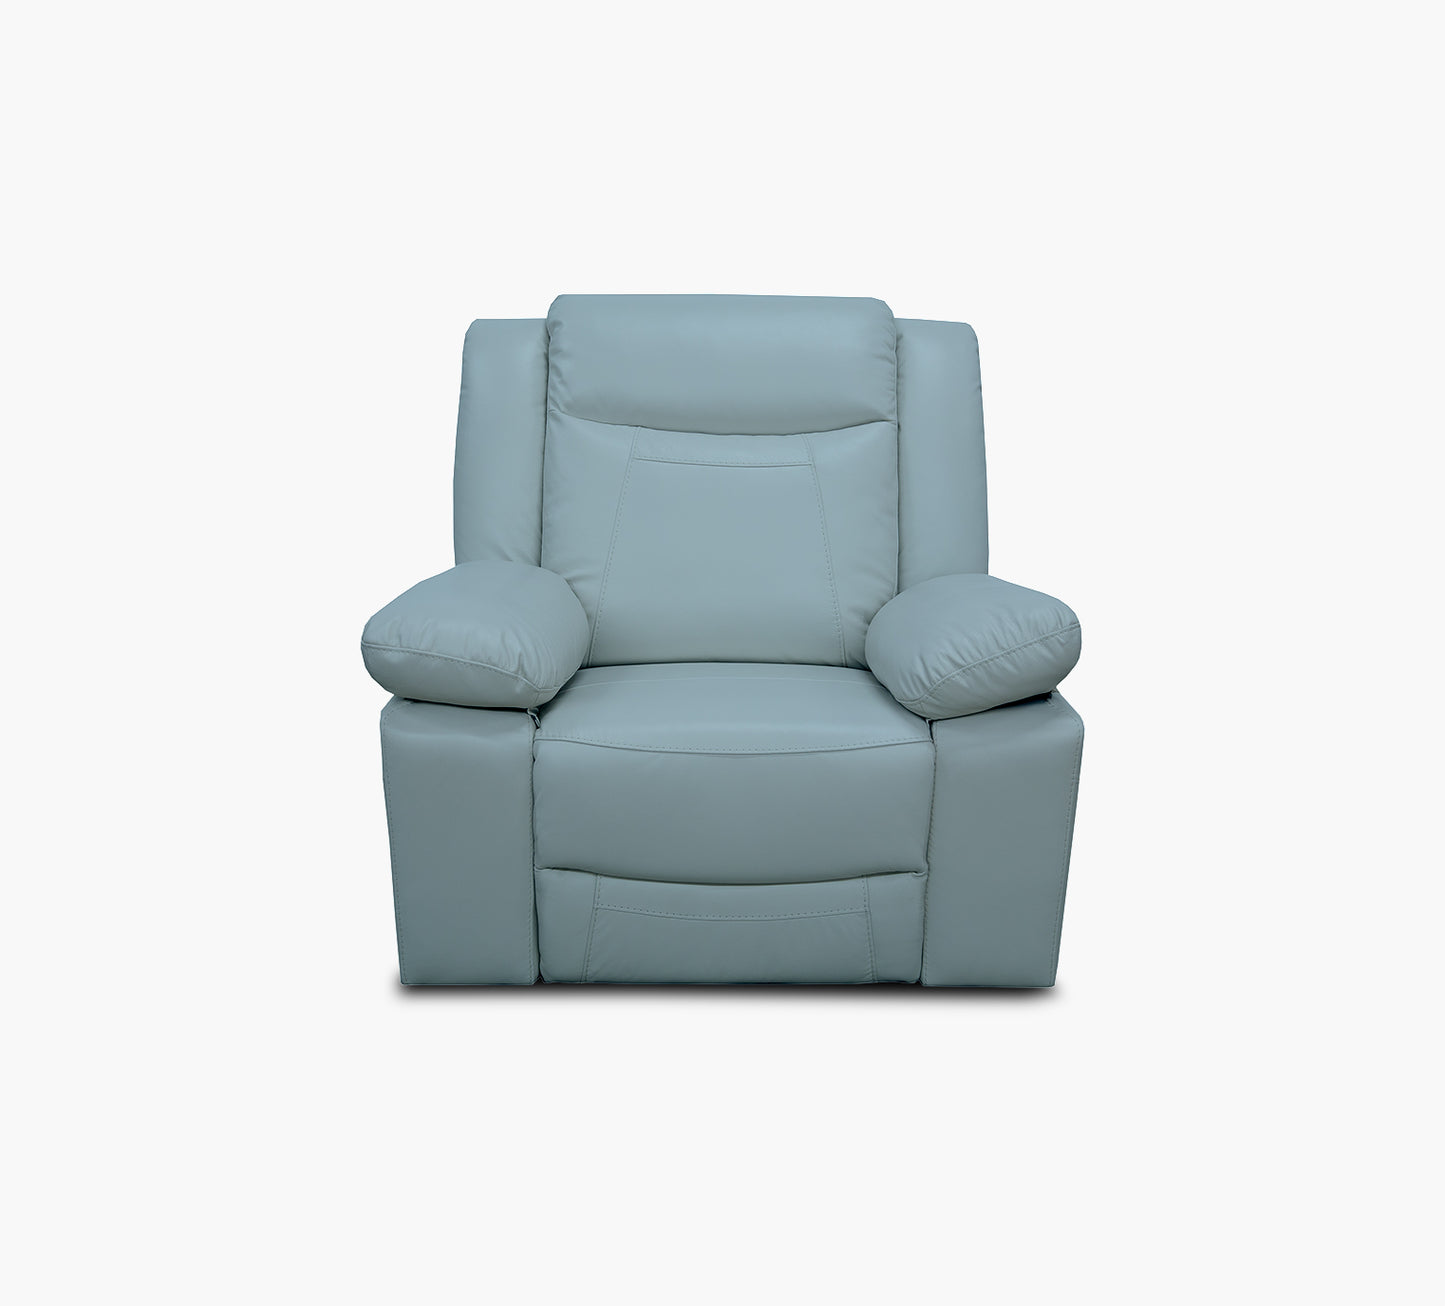 Dallas Teal Leather Glider Recliner